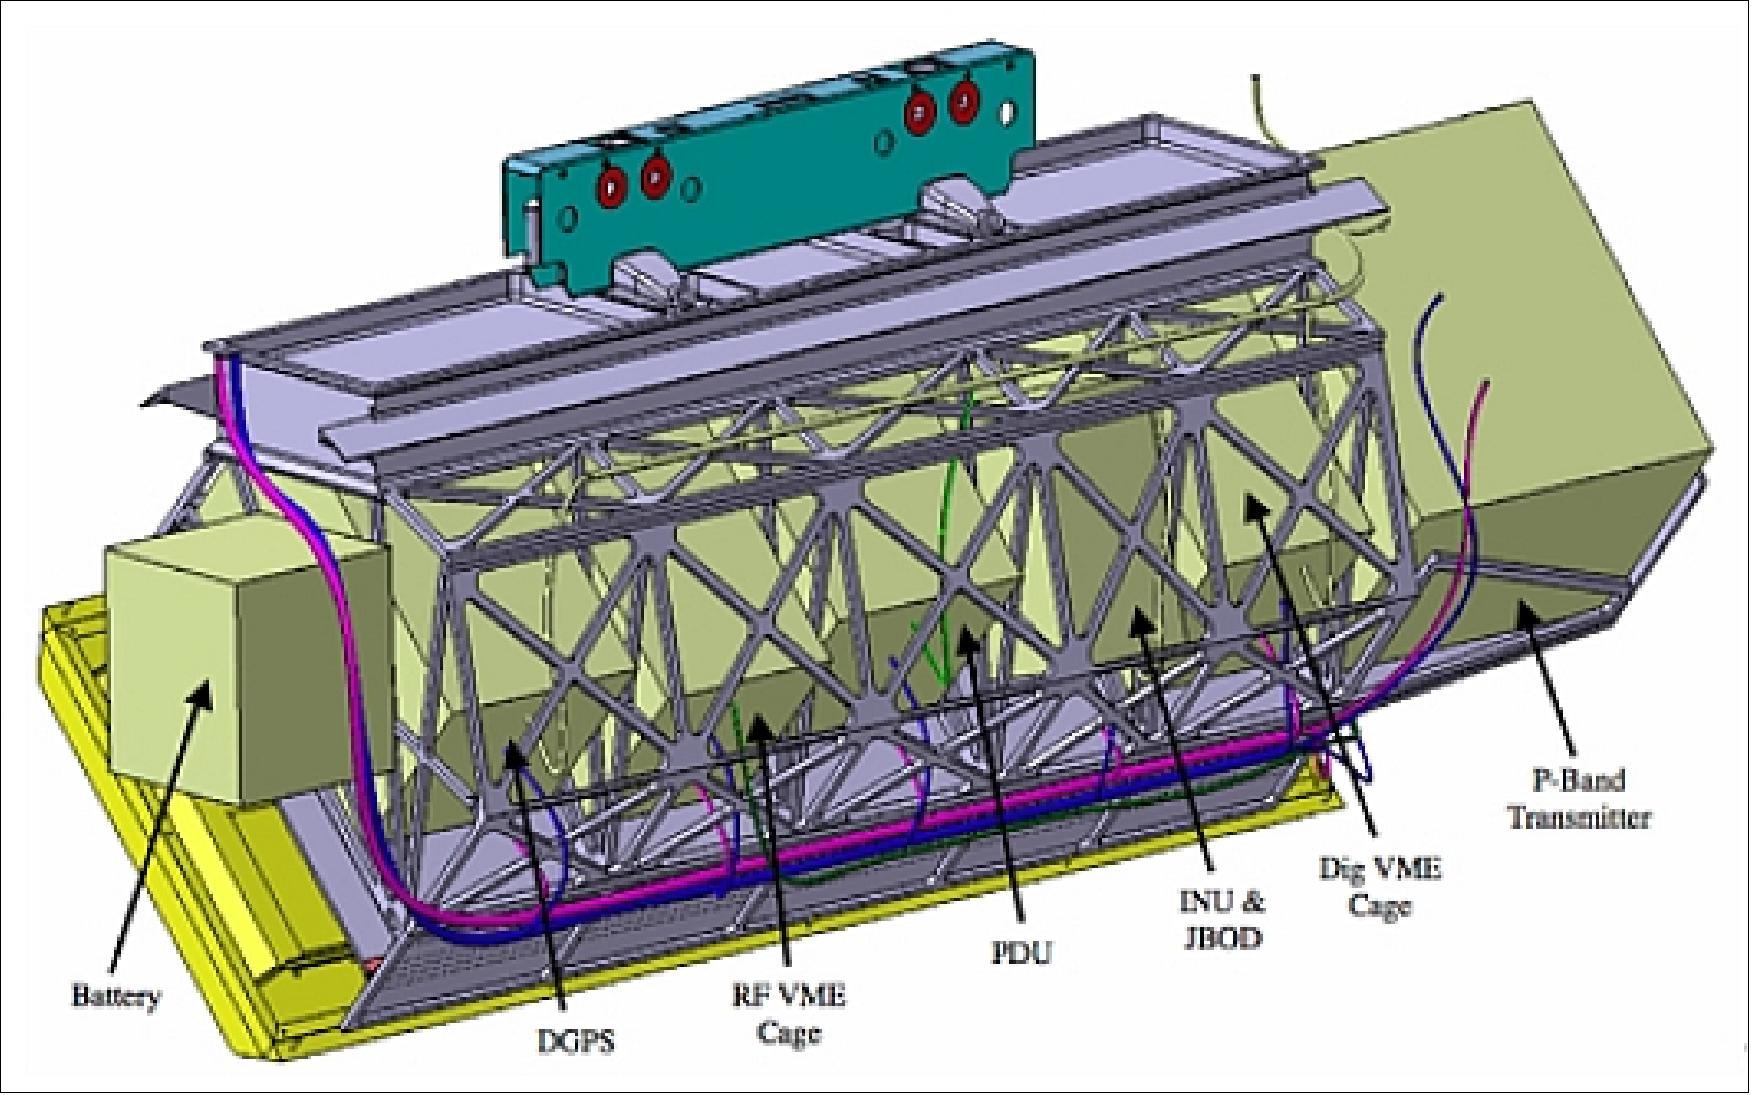 Figure 22: Configuration of the L-band radar electronics and antenna within the pod structure (image credit: NASA/JPL)